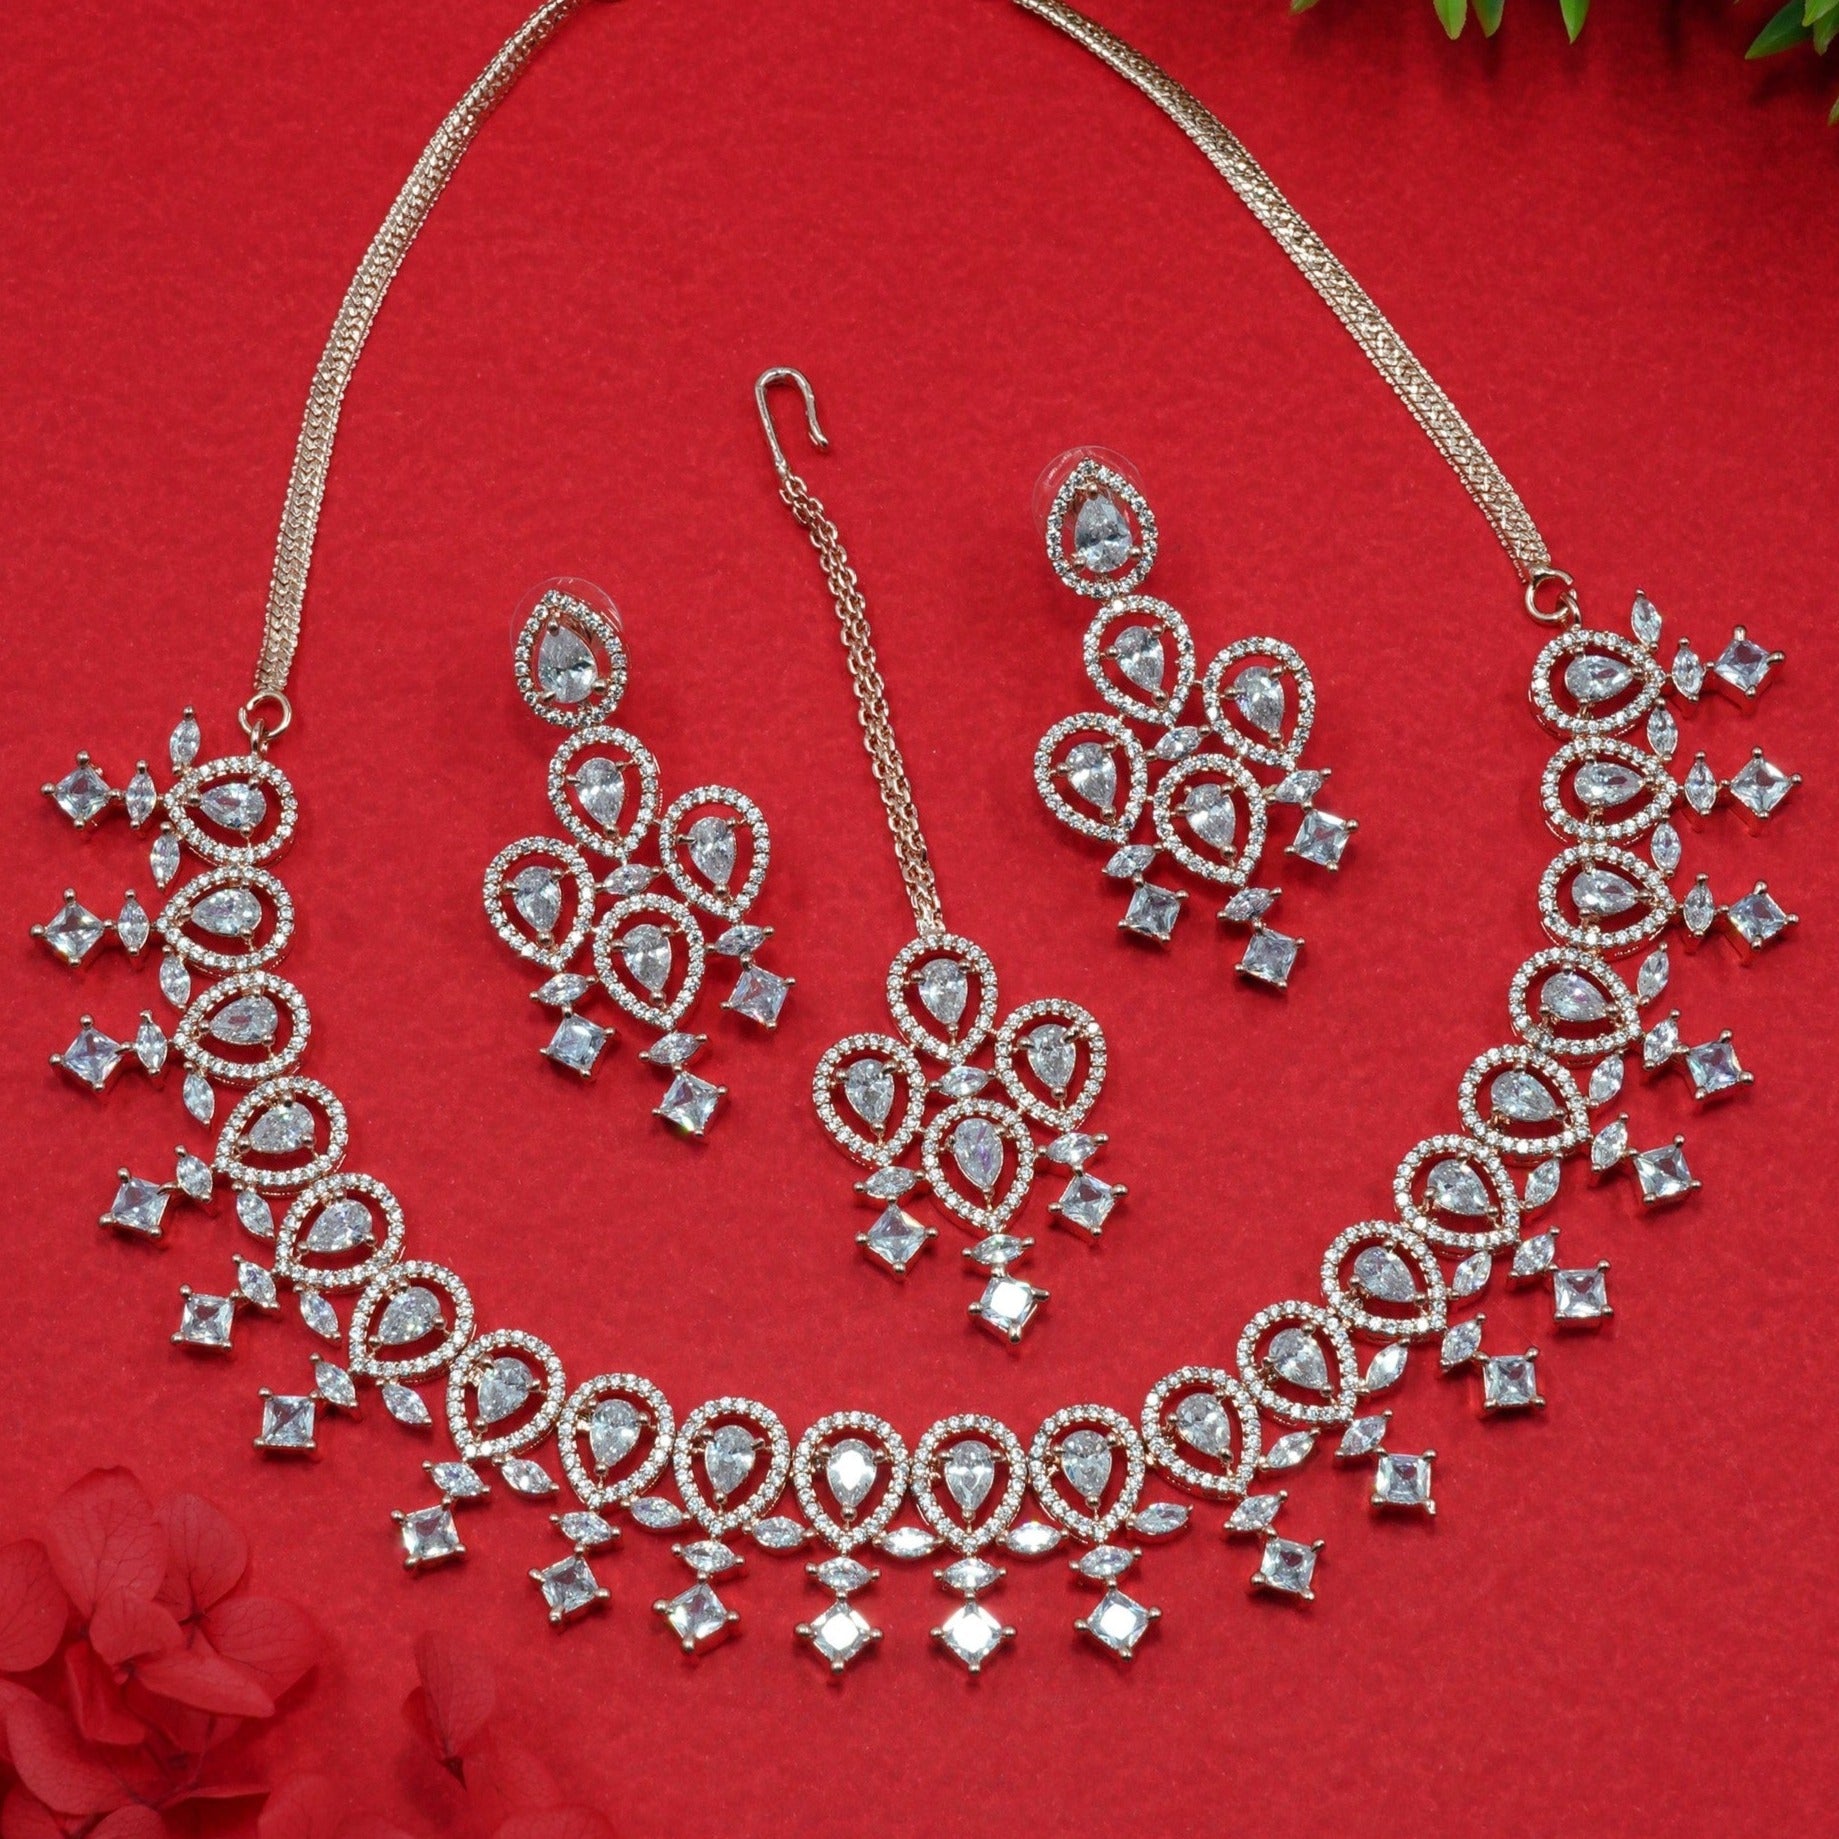 Premium Rose Gold Plated with sparkling White CZ stones Bridal Necklace Set 8924N